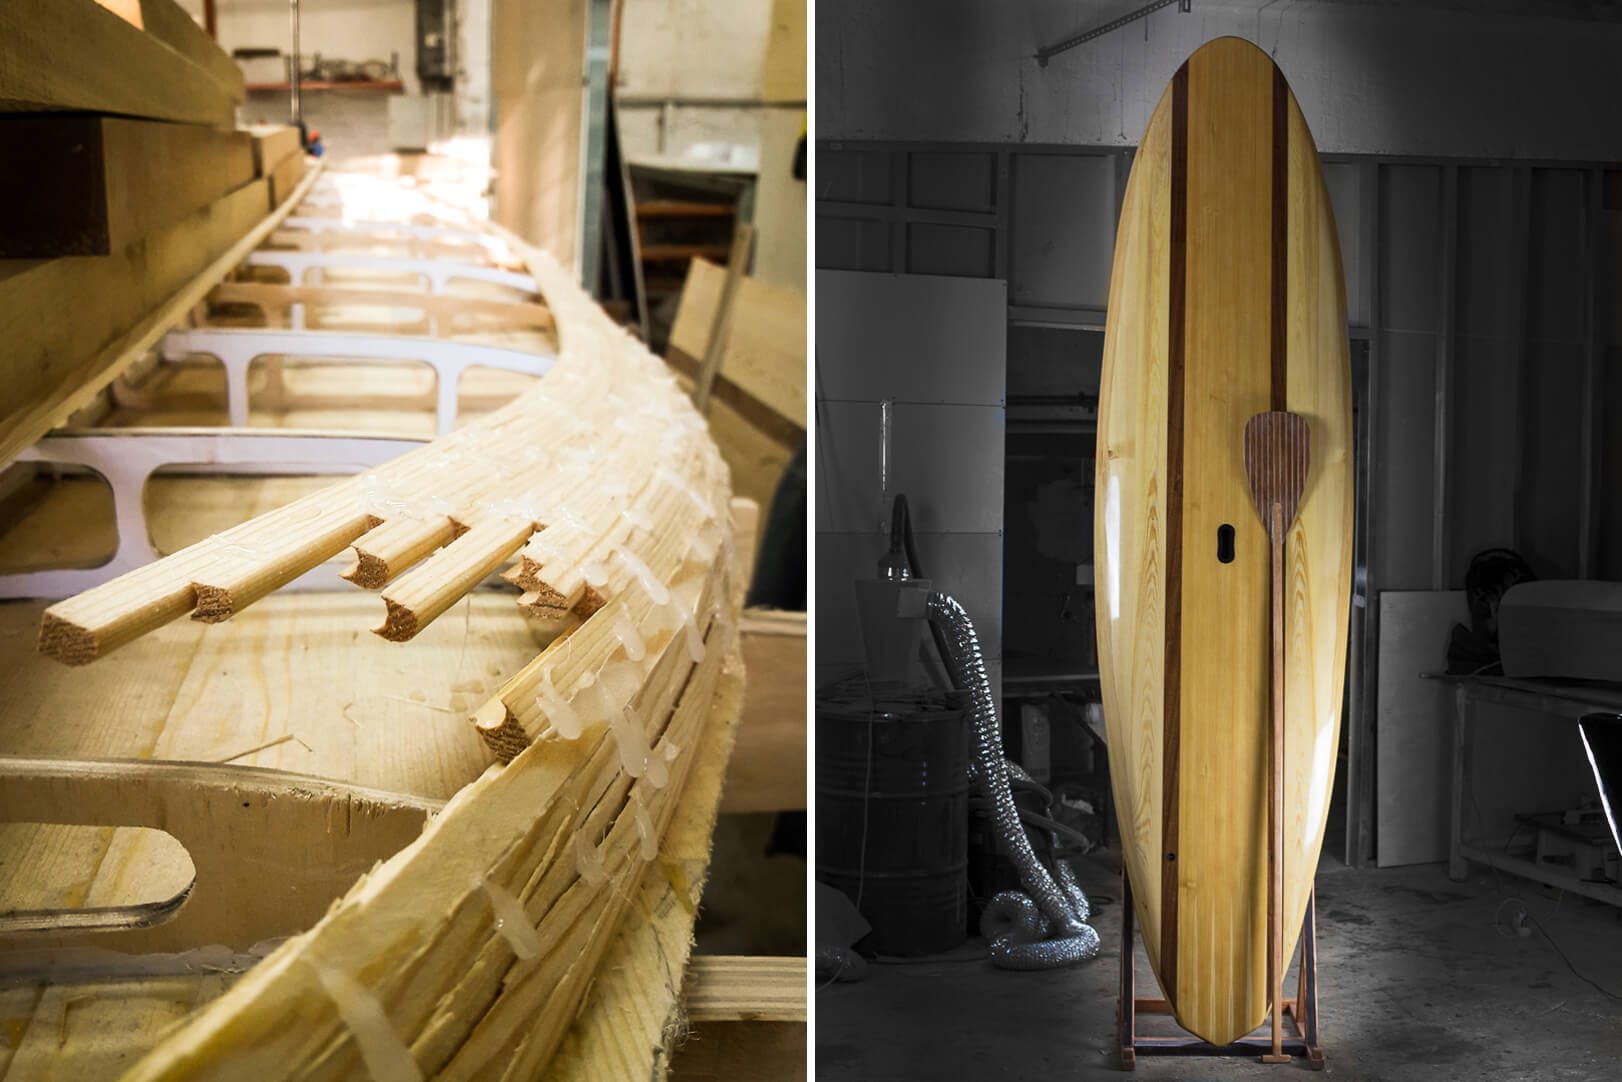 A Mitrich paddleboard under construction shown on the left and the finished article on the right.